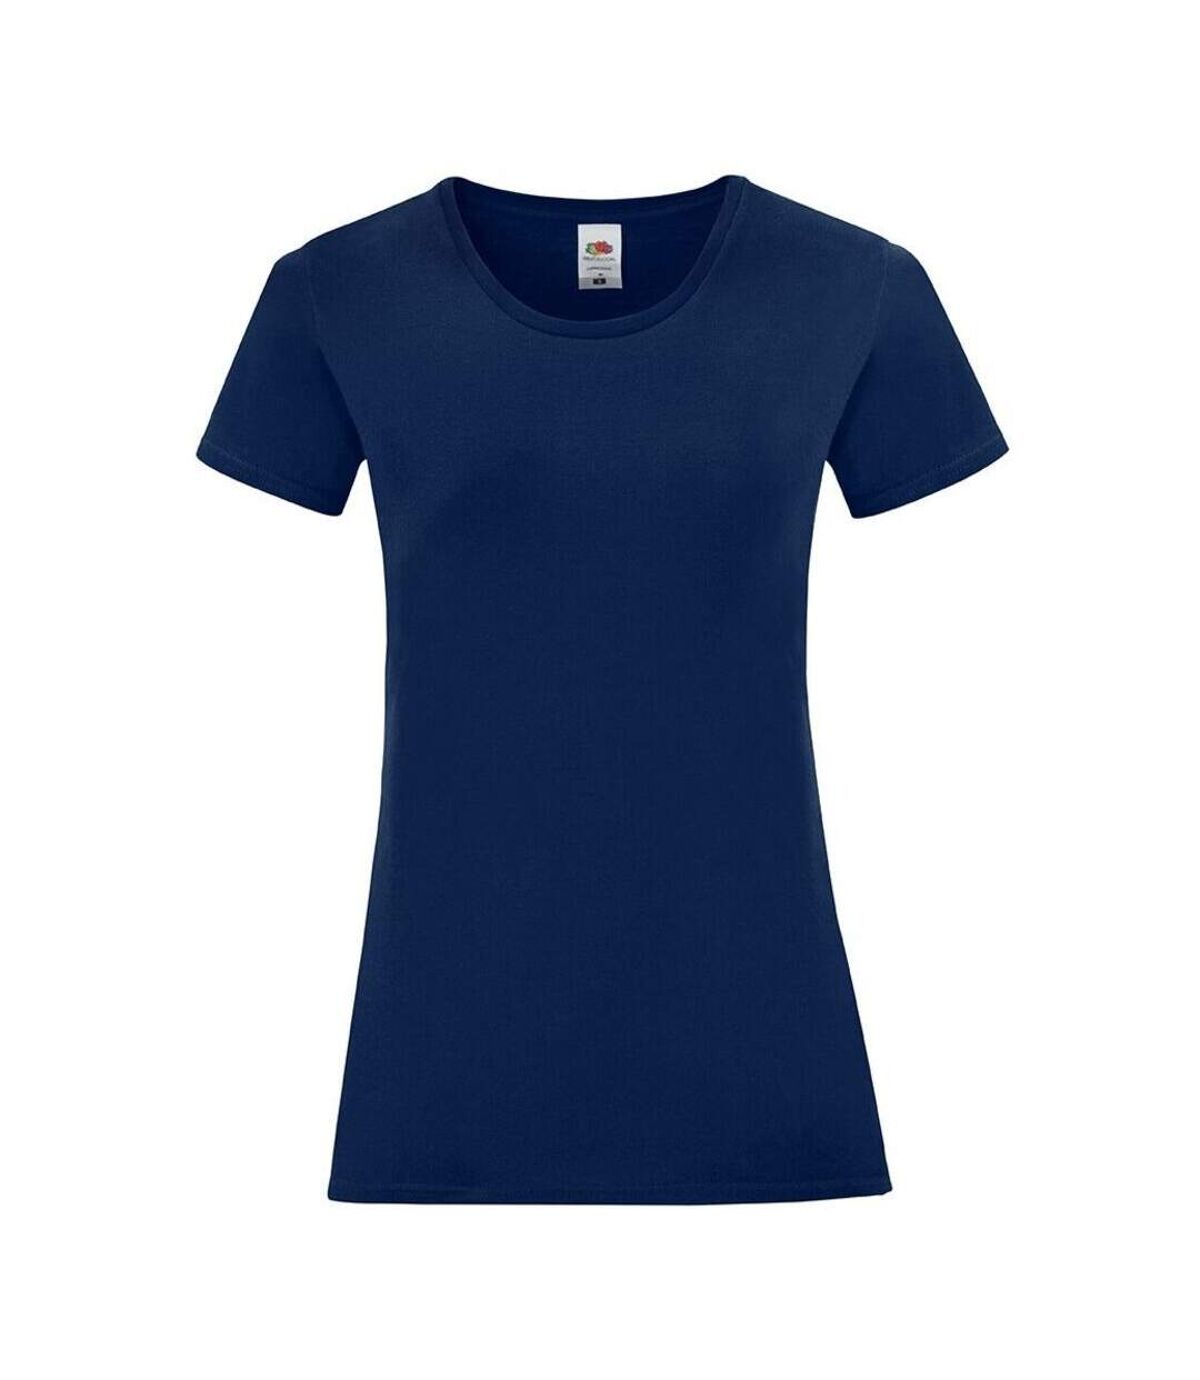 Fruit of the Loom Womens/Ladies Iconic T-Shirt (Navy)